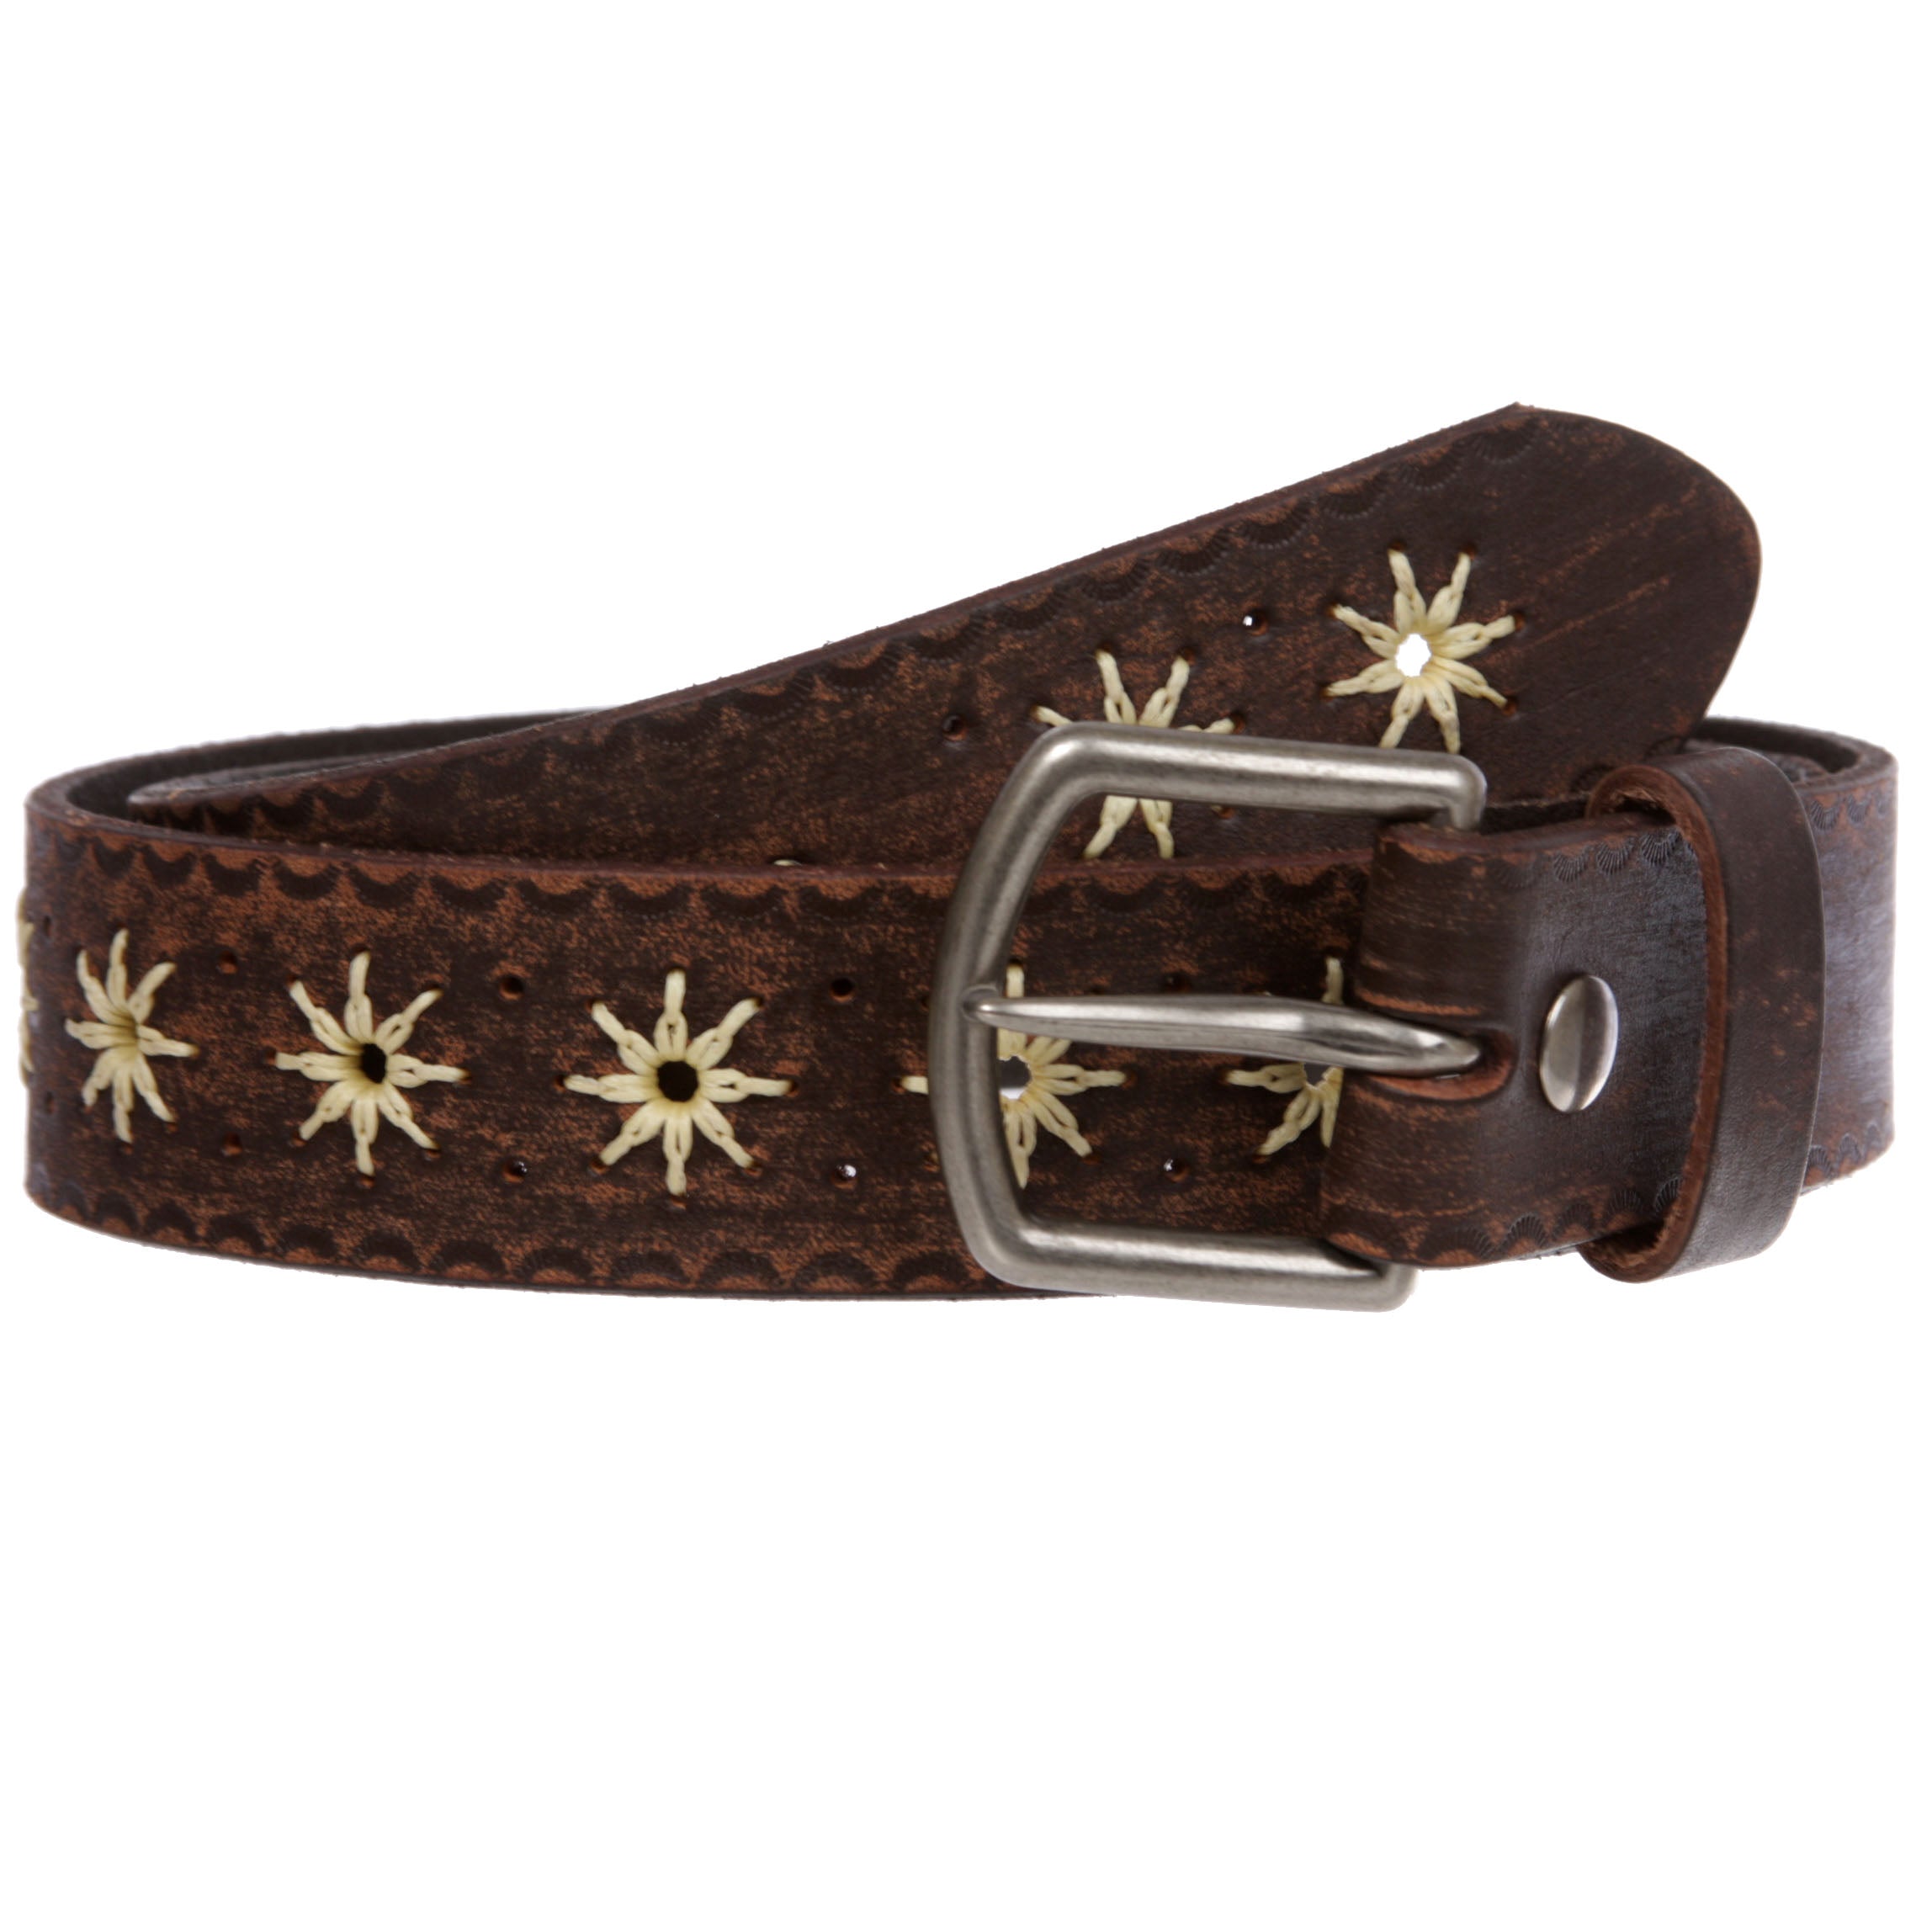 Snap on Embossed Vintage Leather Jean Belt with Interchangeable Antique Silver Buckle